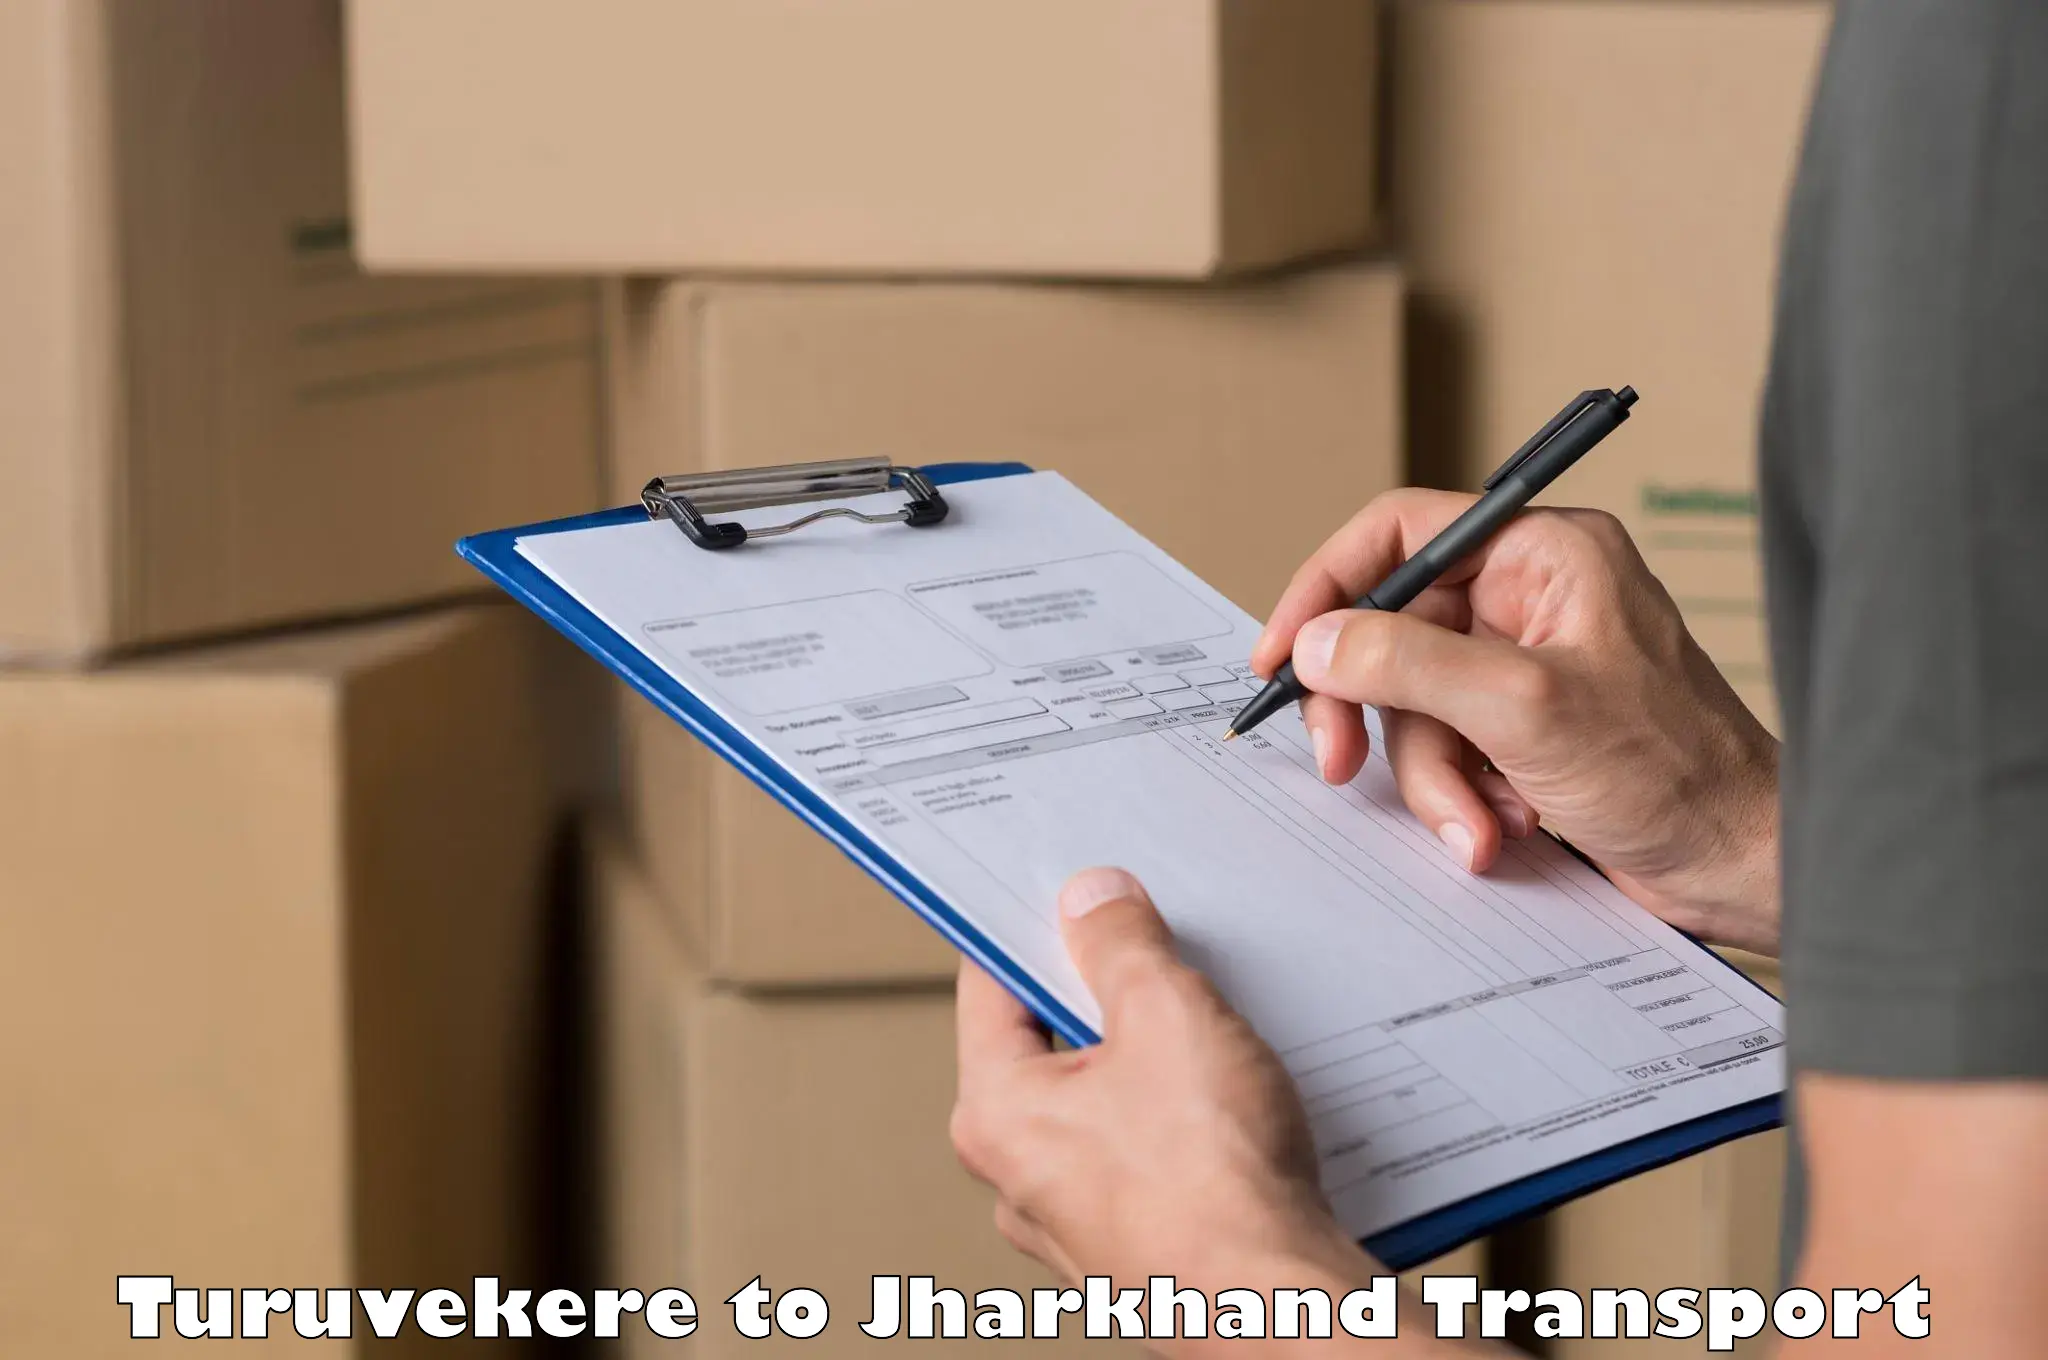 Furniture transport service Turuvekere to Jharkhand